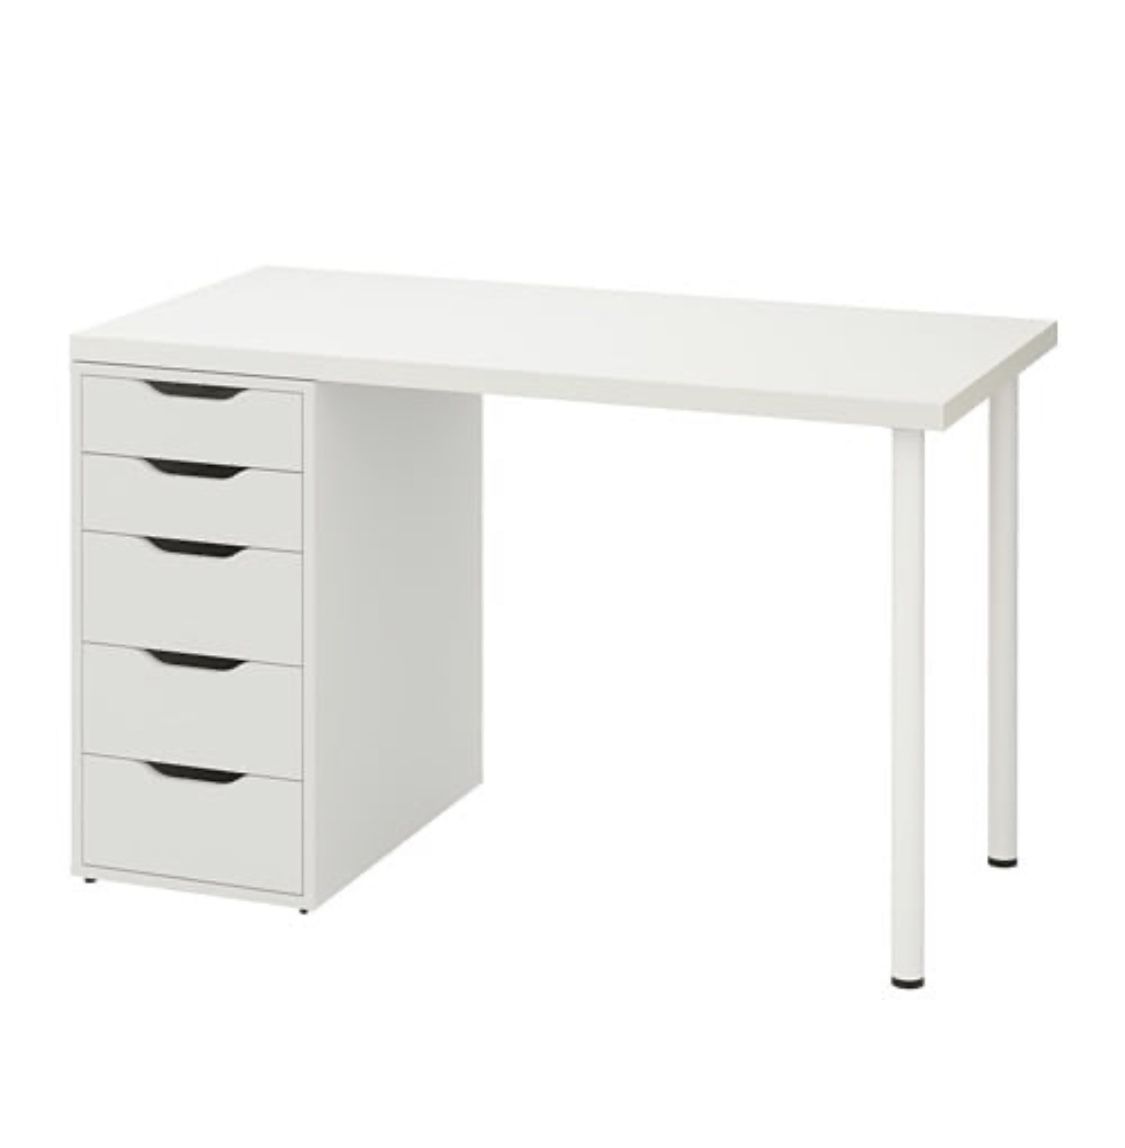 98% New Table/Desk/Computer Table with drawers 89$